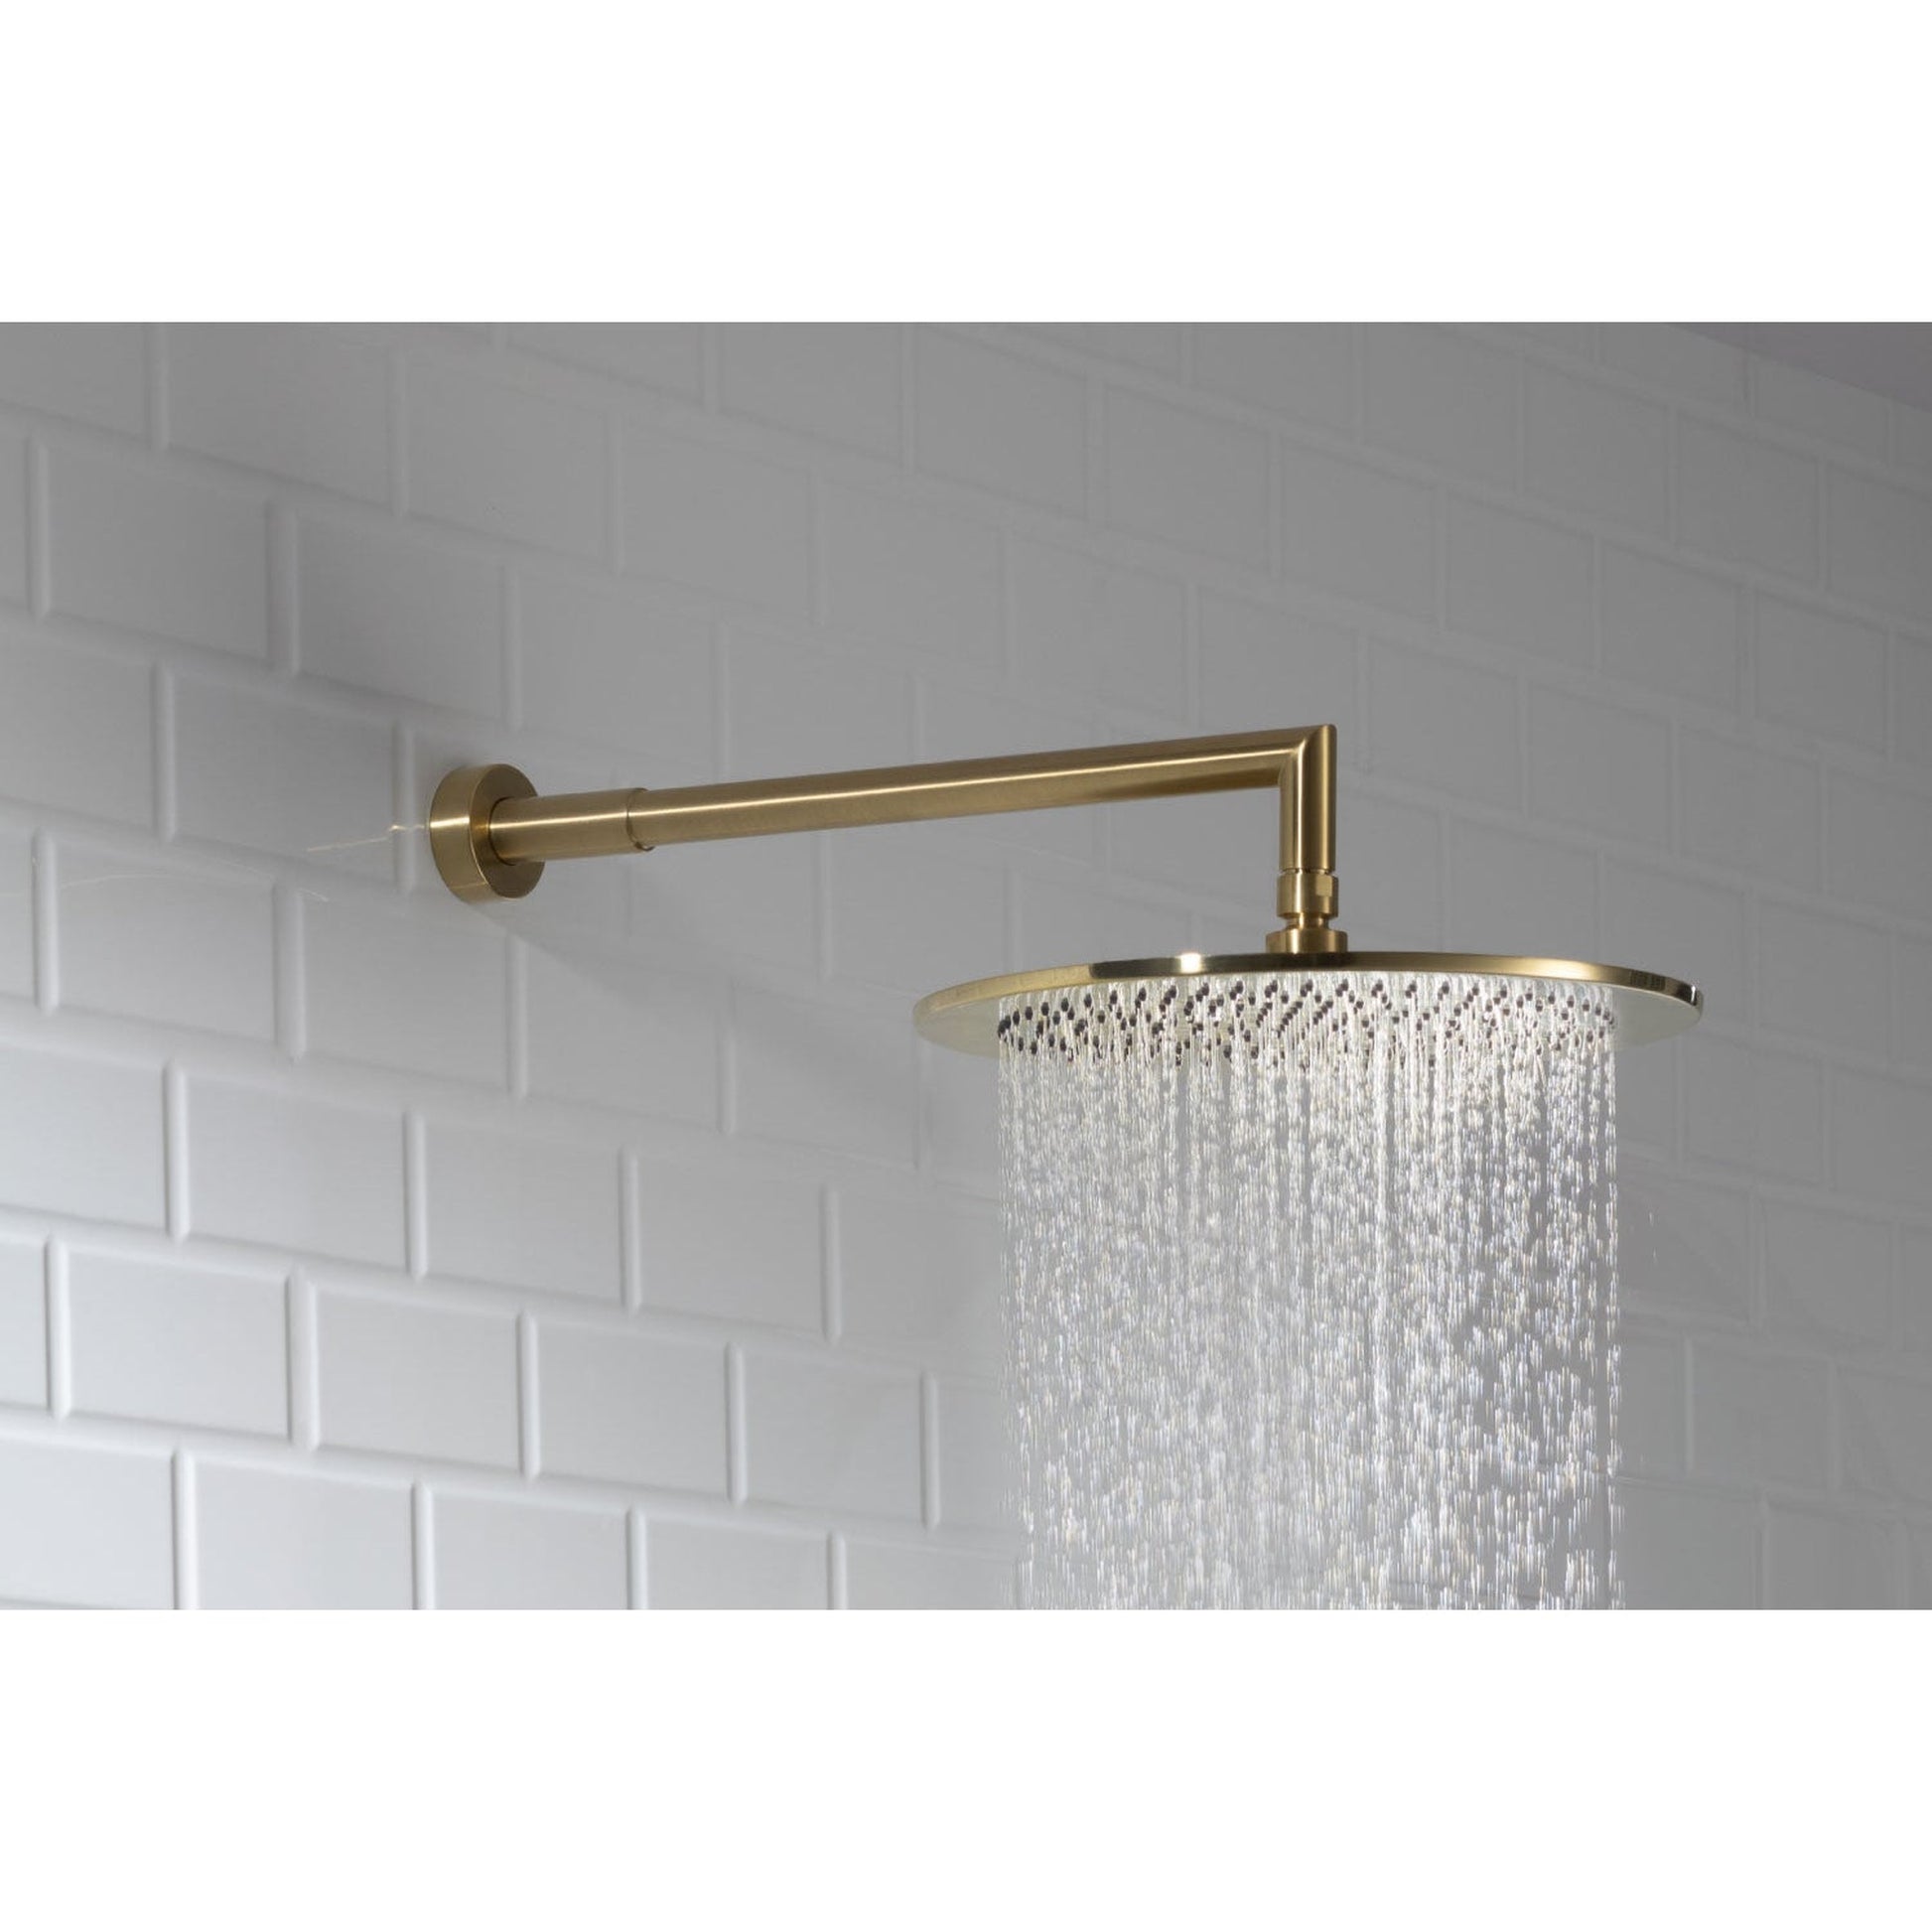 Isenberg Universal Fixtures 16" Chrome Solid Brass Wall-Mounted Shower Arm With Angled Extension and Round Sliding Flange